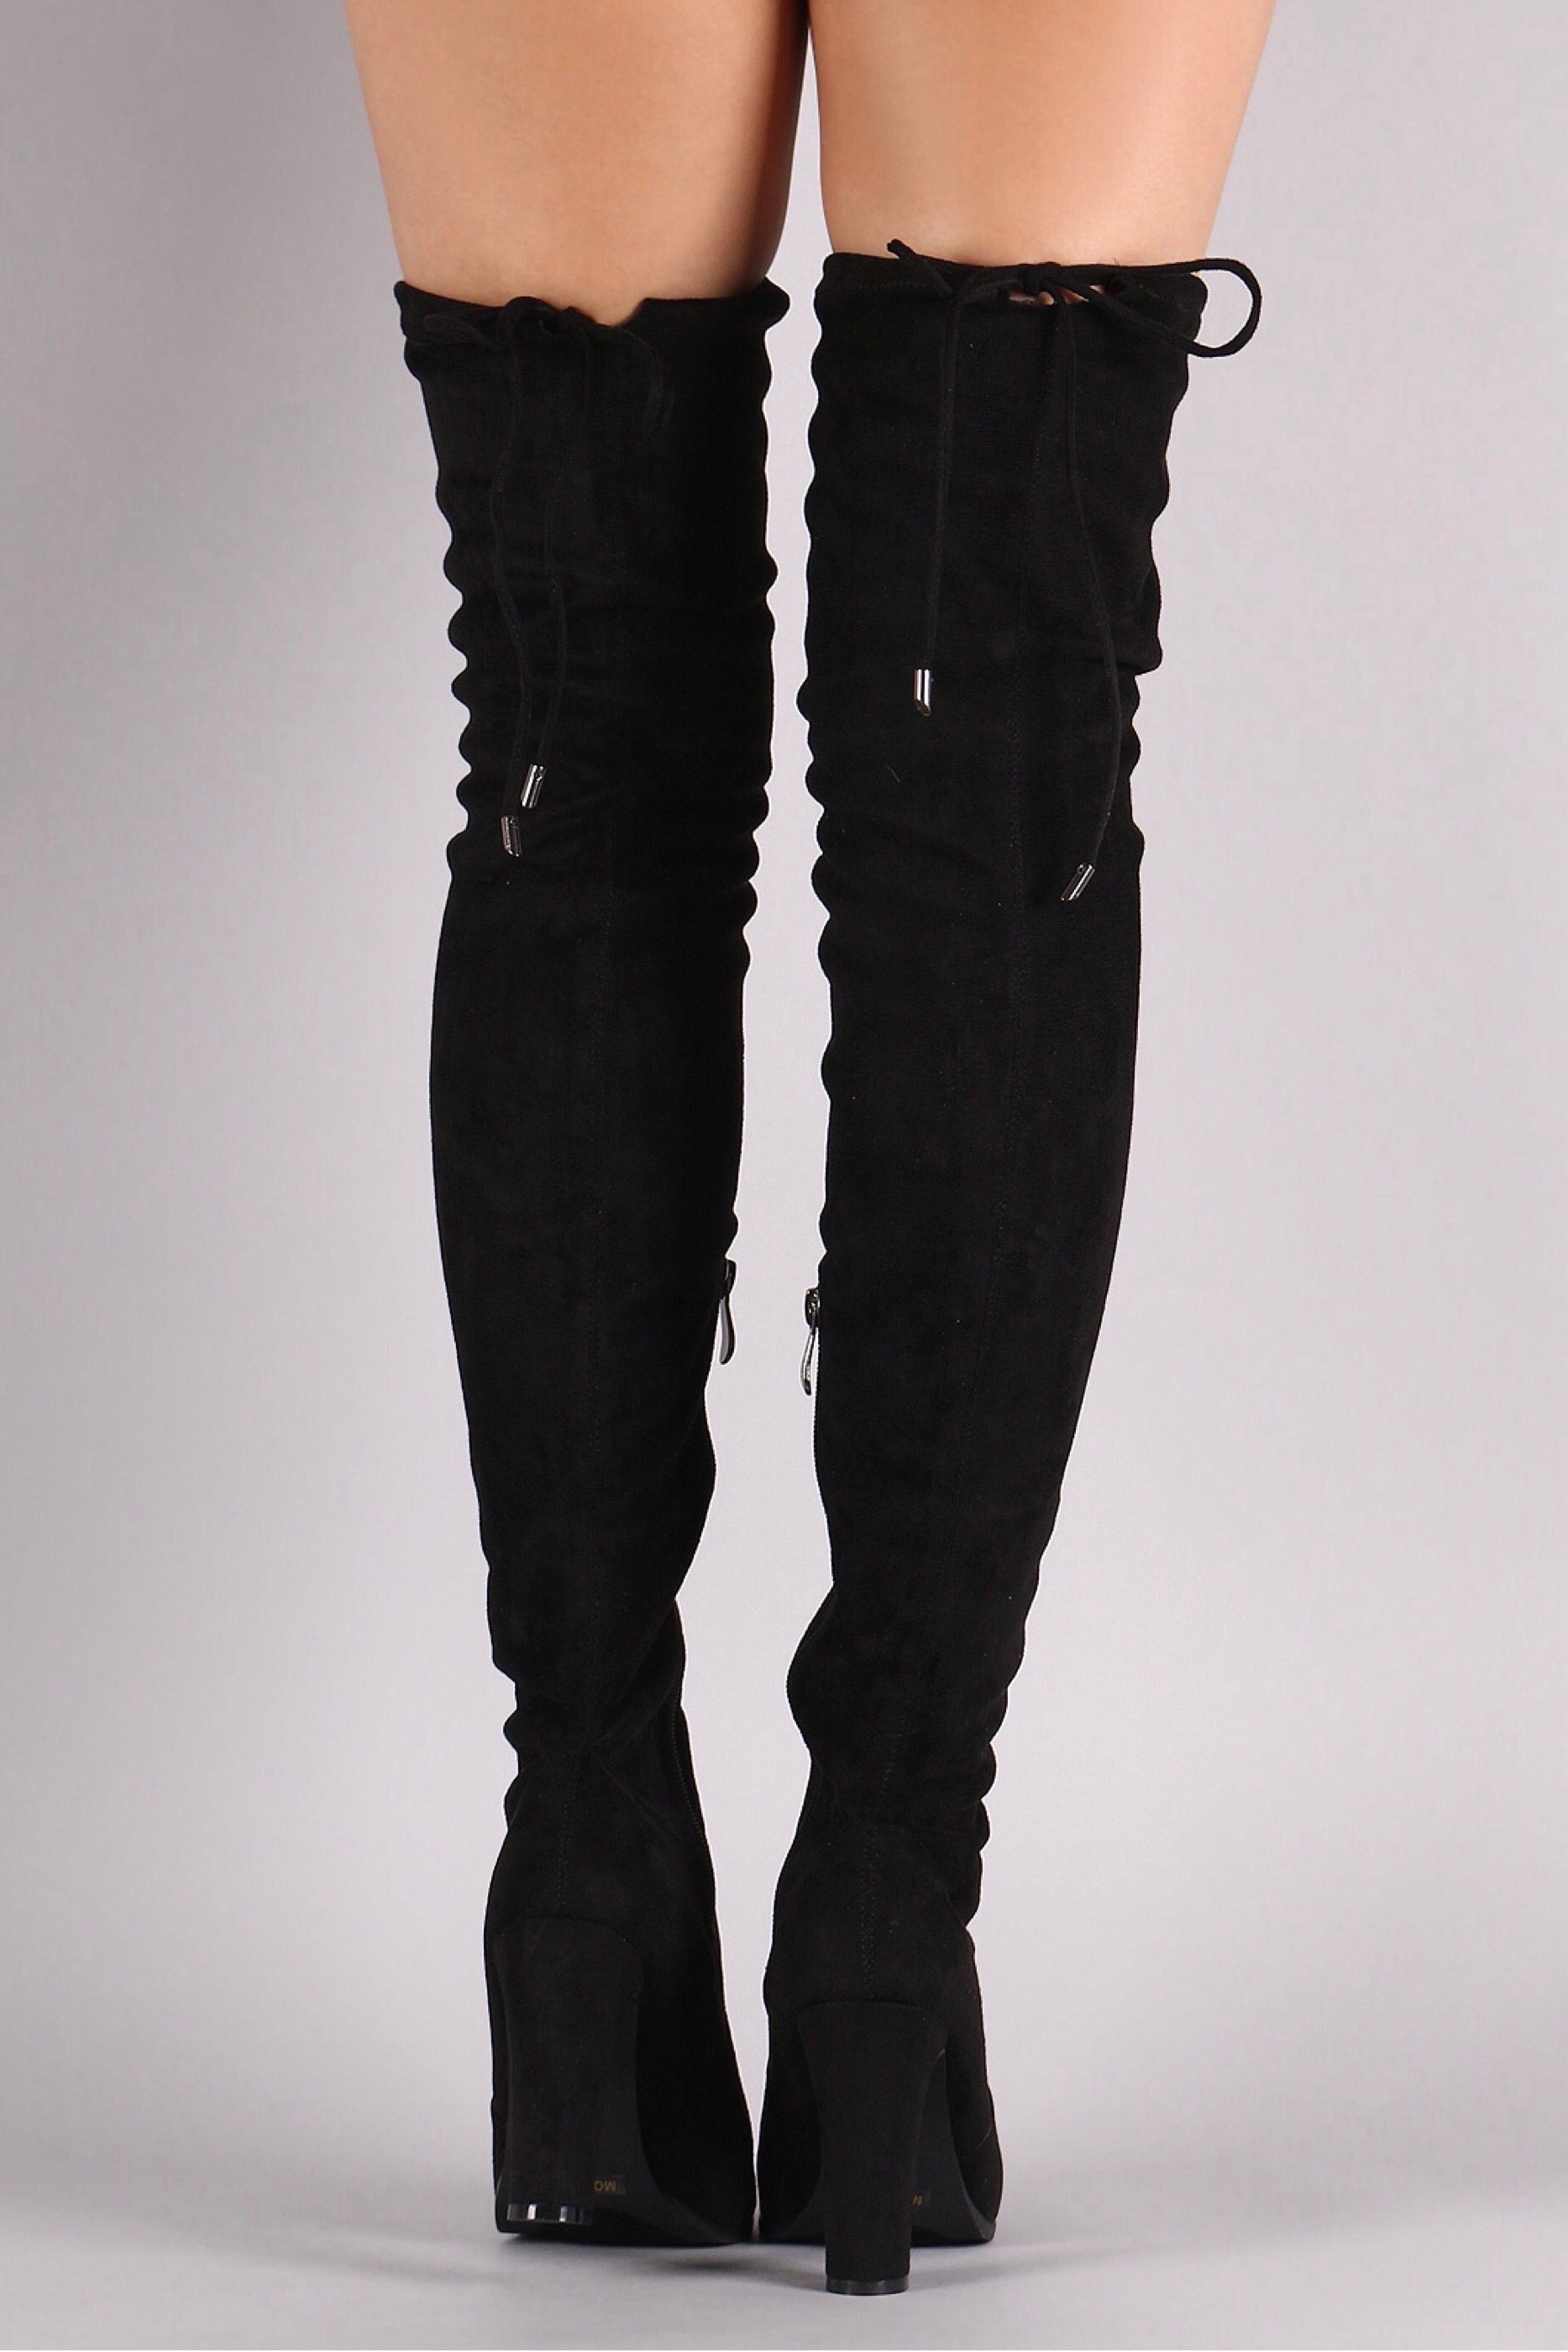 Mona thigh high black boots with a chunky heel - Dimesi Boutique